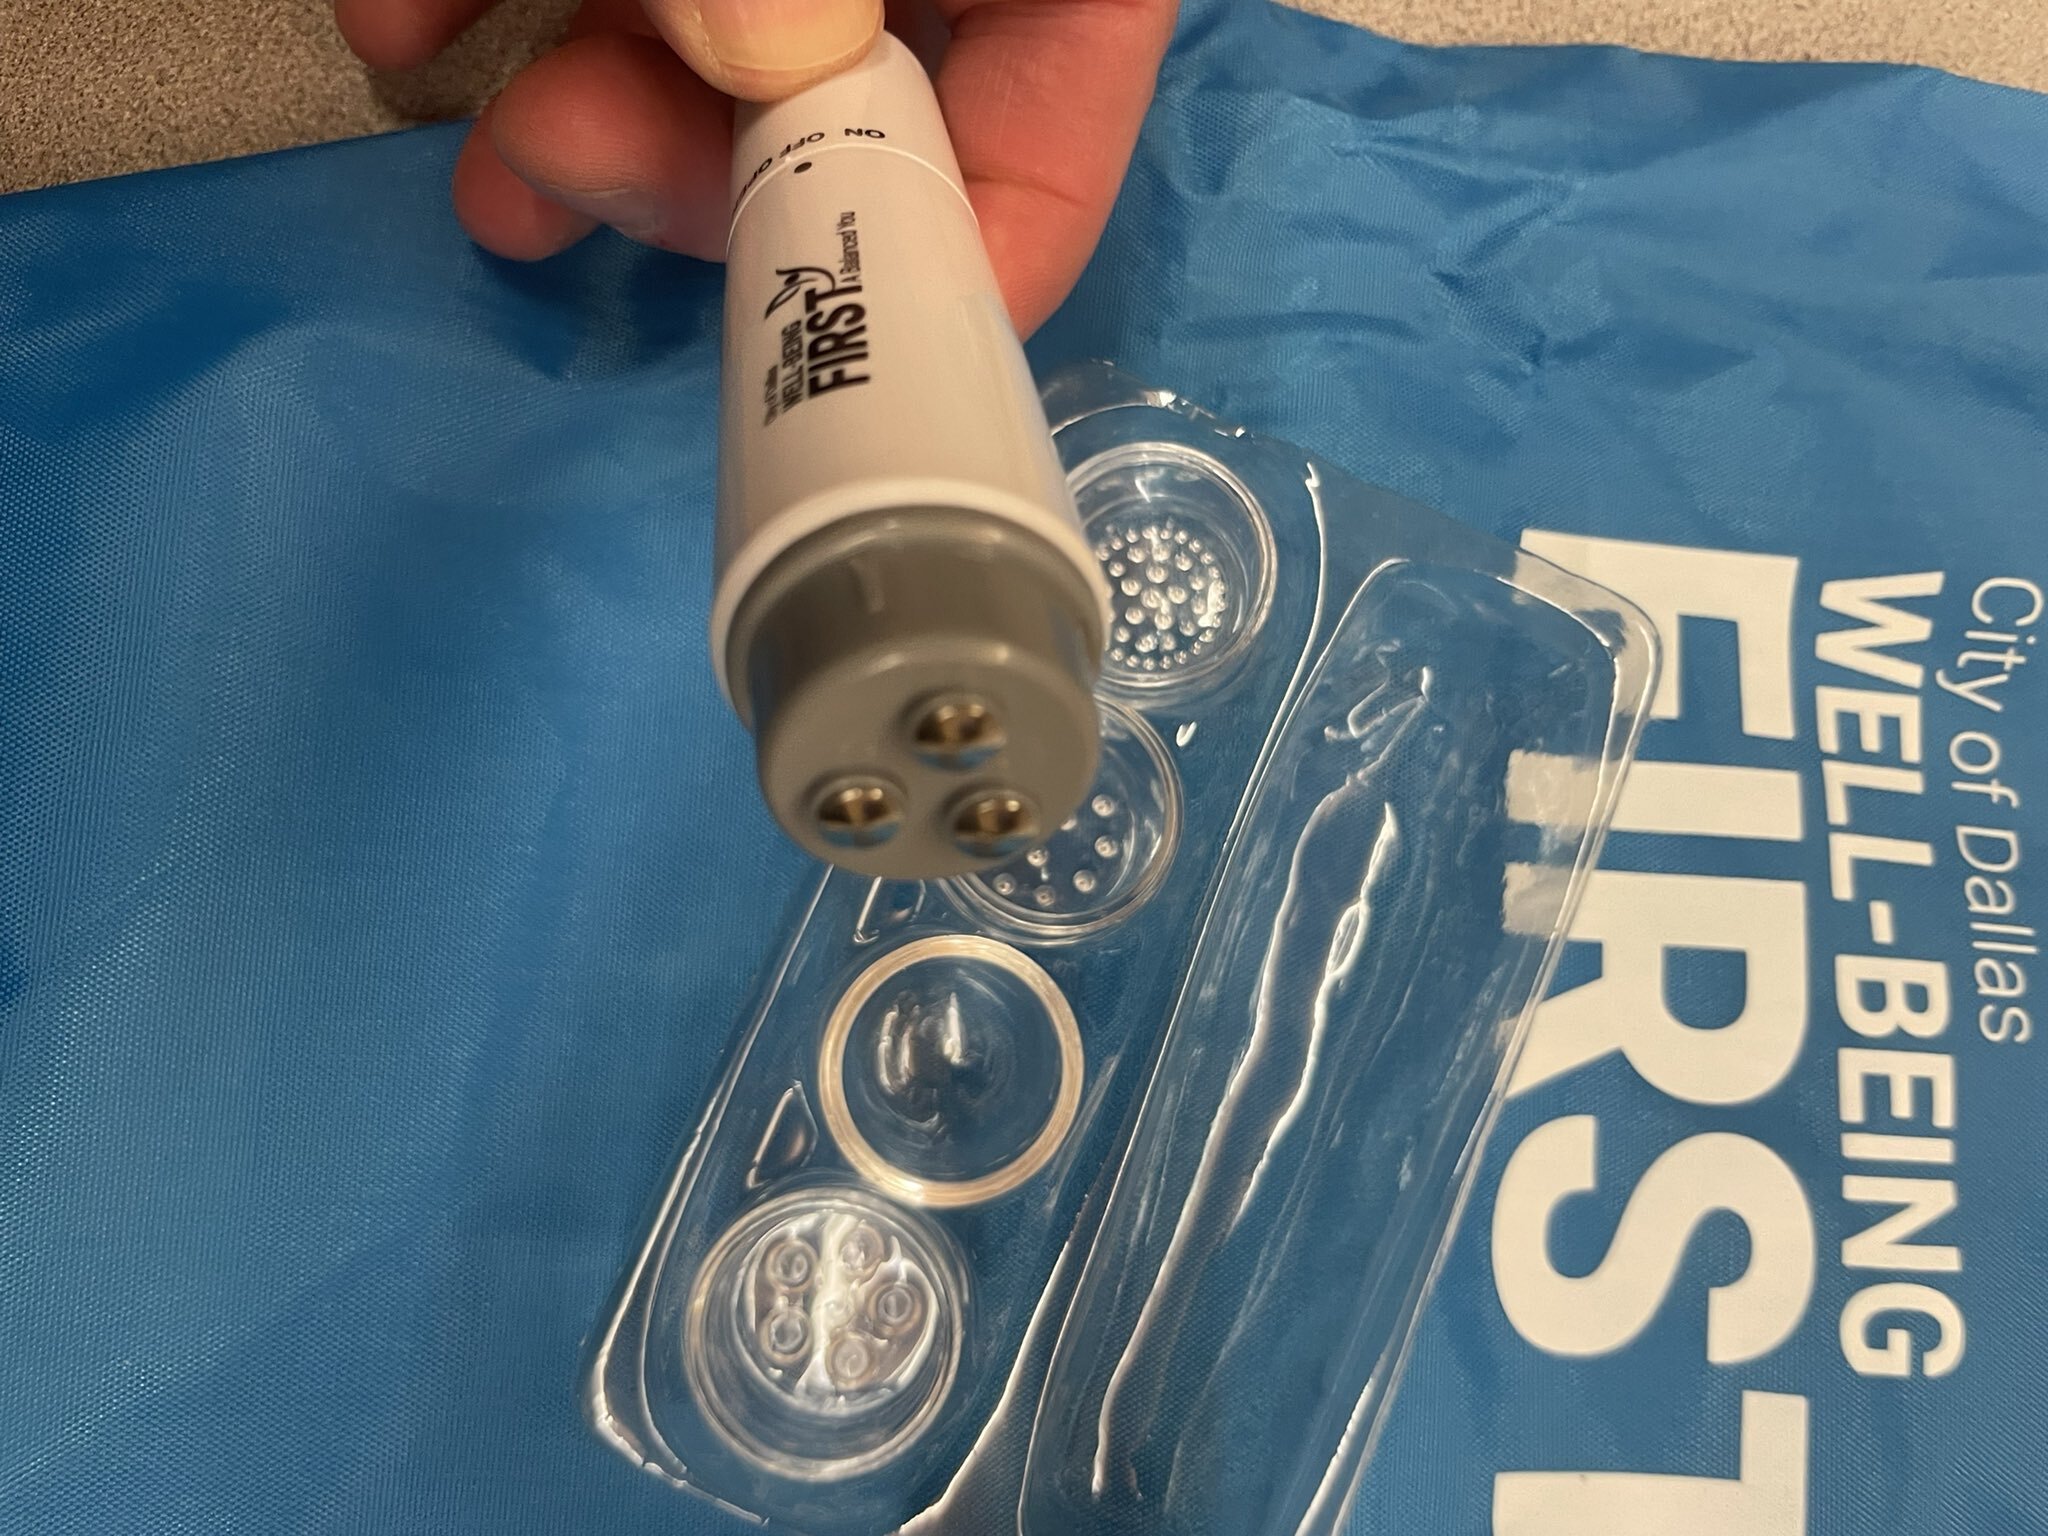 Dallas employees given massager that resembles sex toy as part of wellness initiative pic